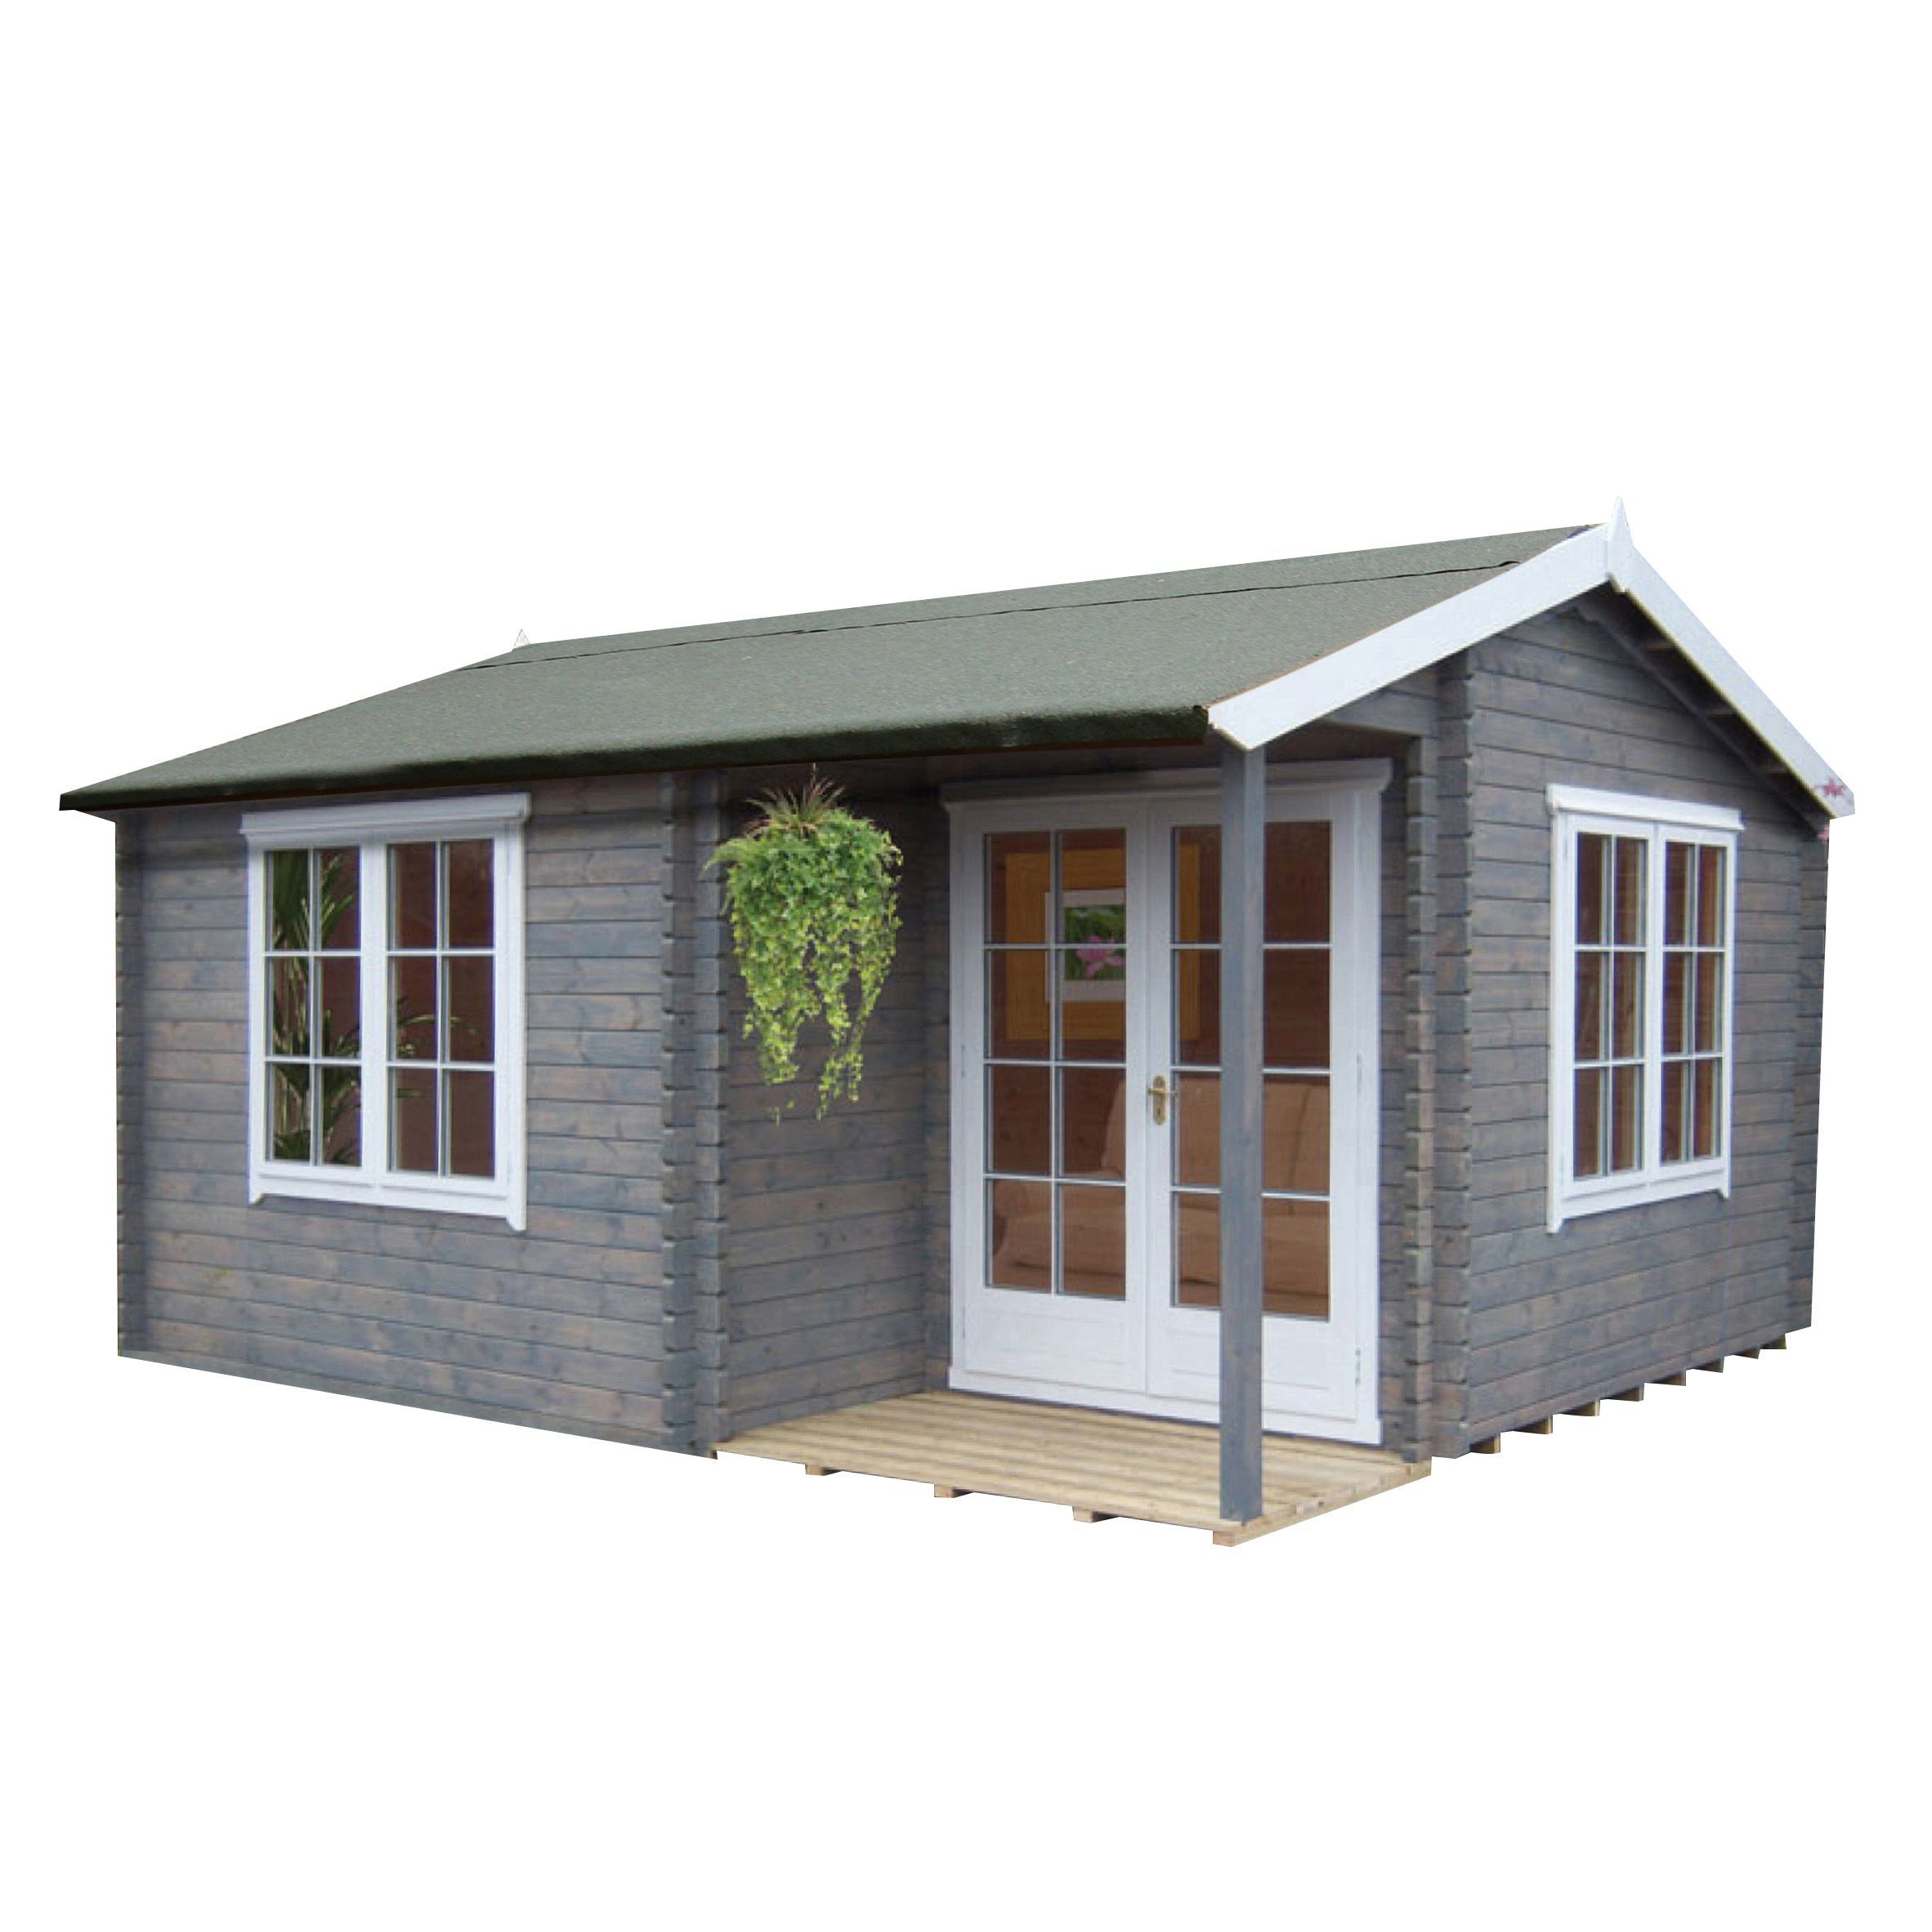 Shire Twyford 14x17 Apex Tongue & groove Wooden Cabin